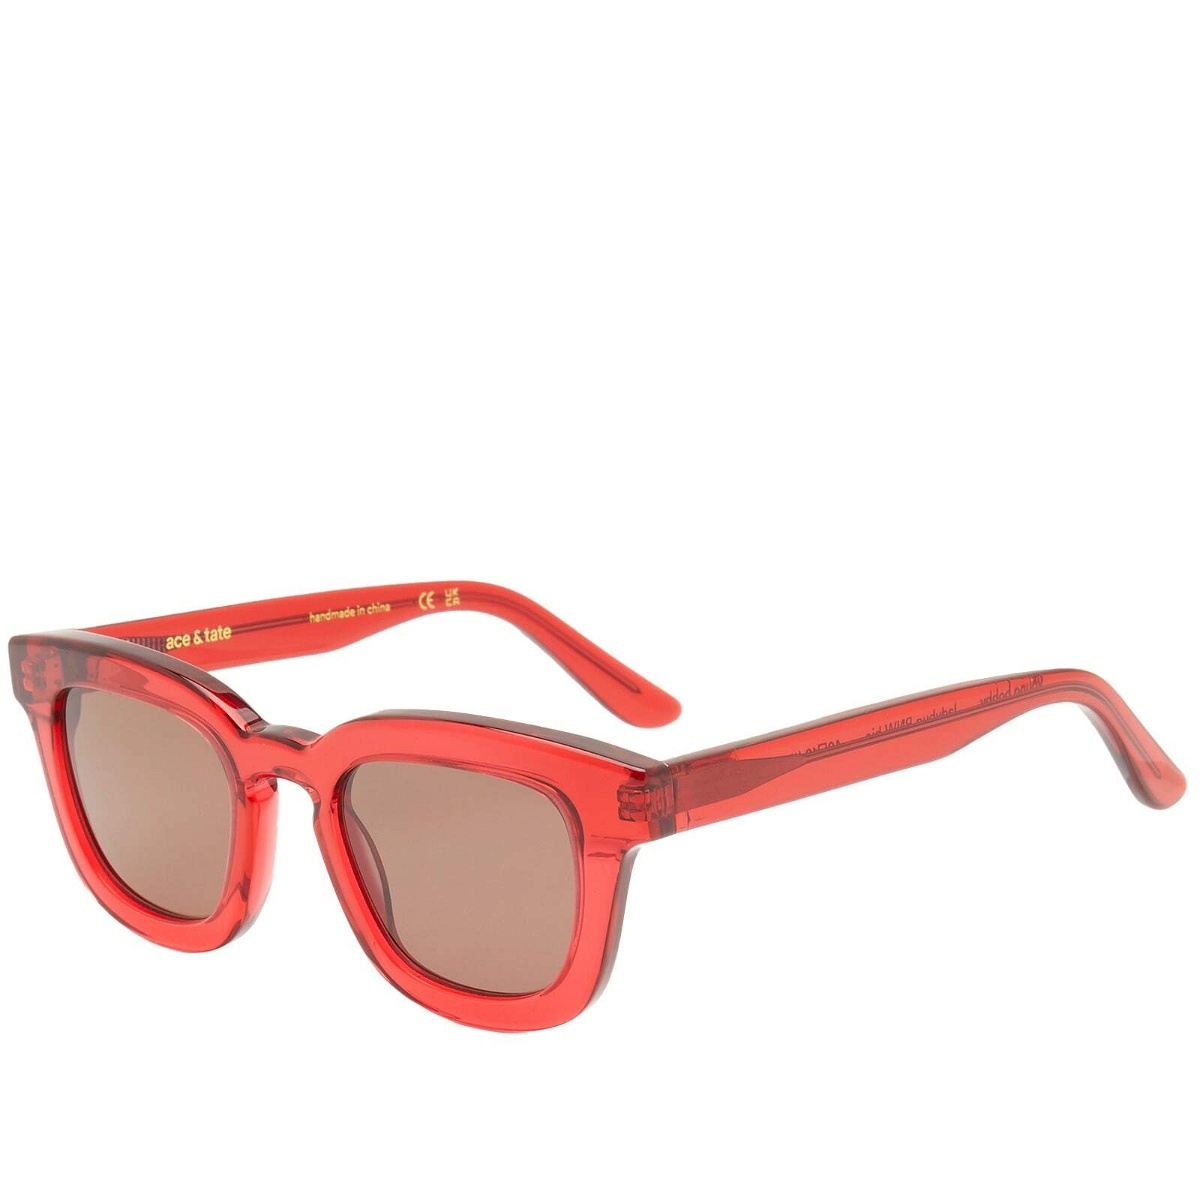 Photo: Ace & Tate Men's Young Bobby Sunglasses in Lady Bug